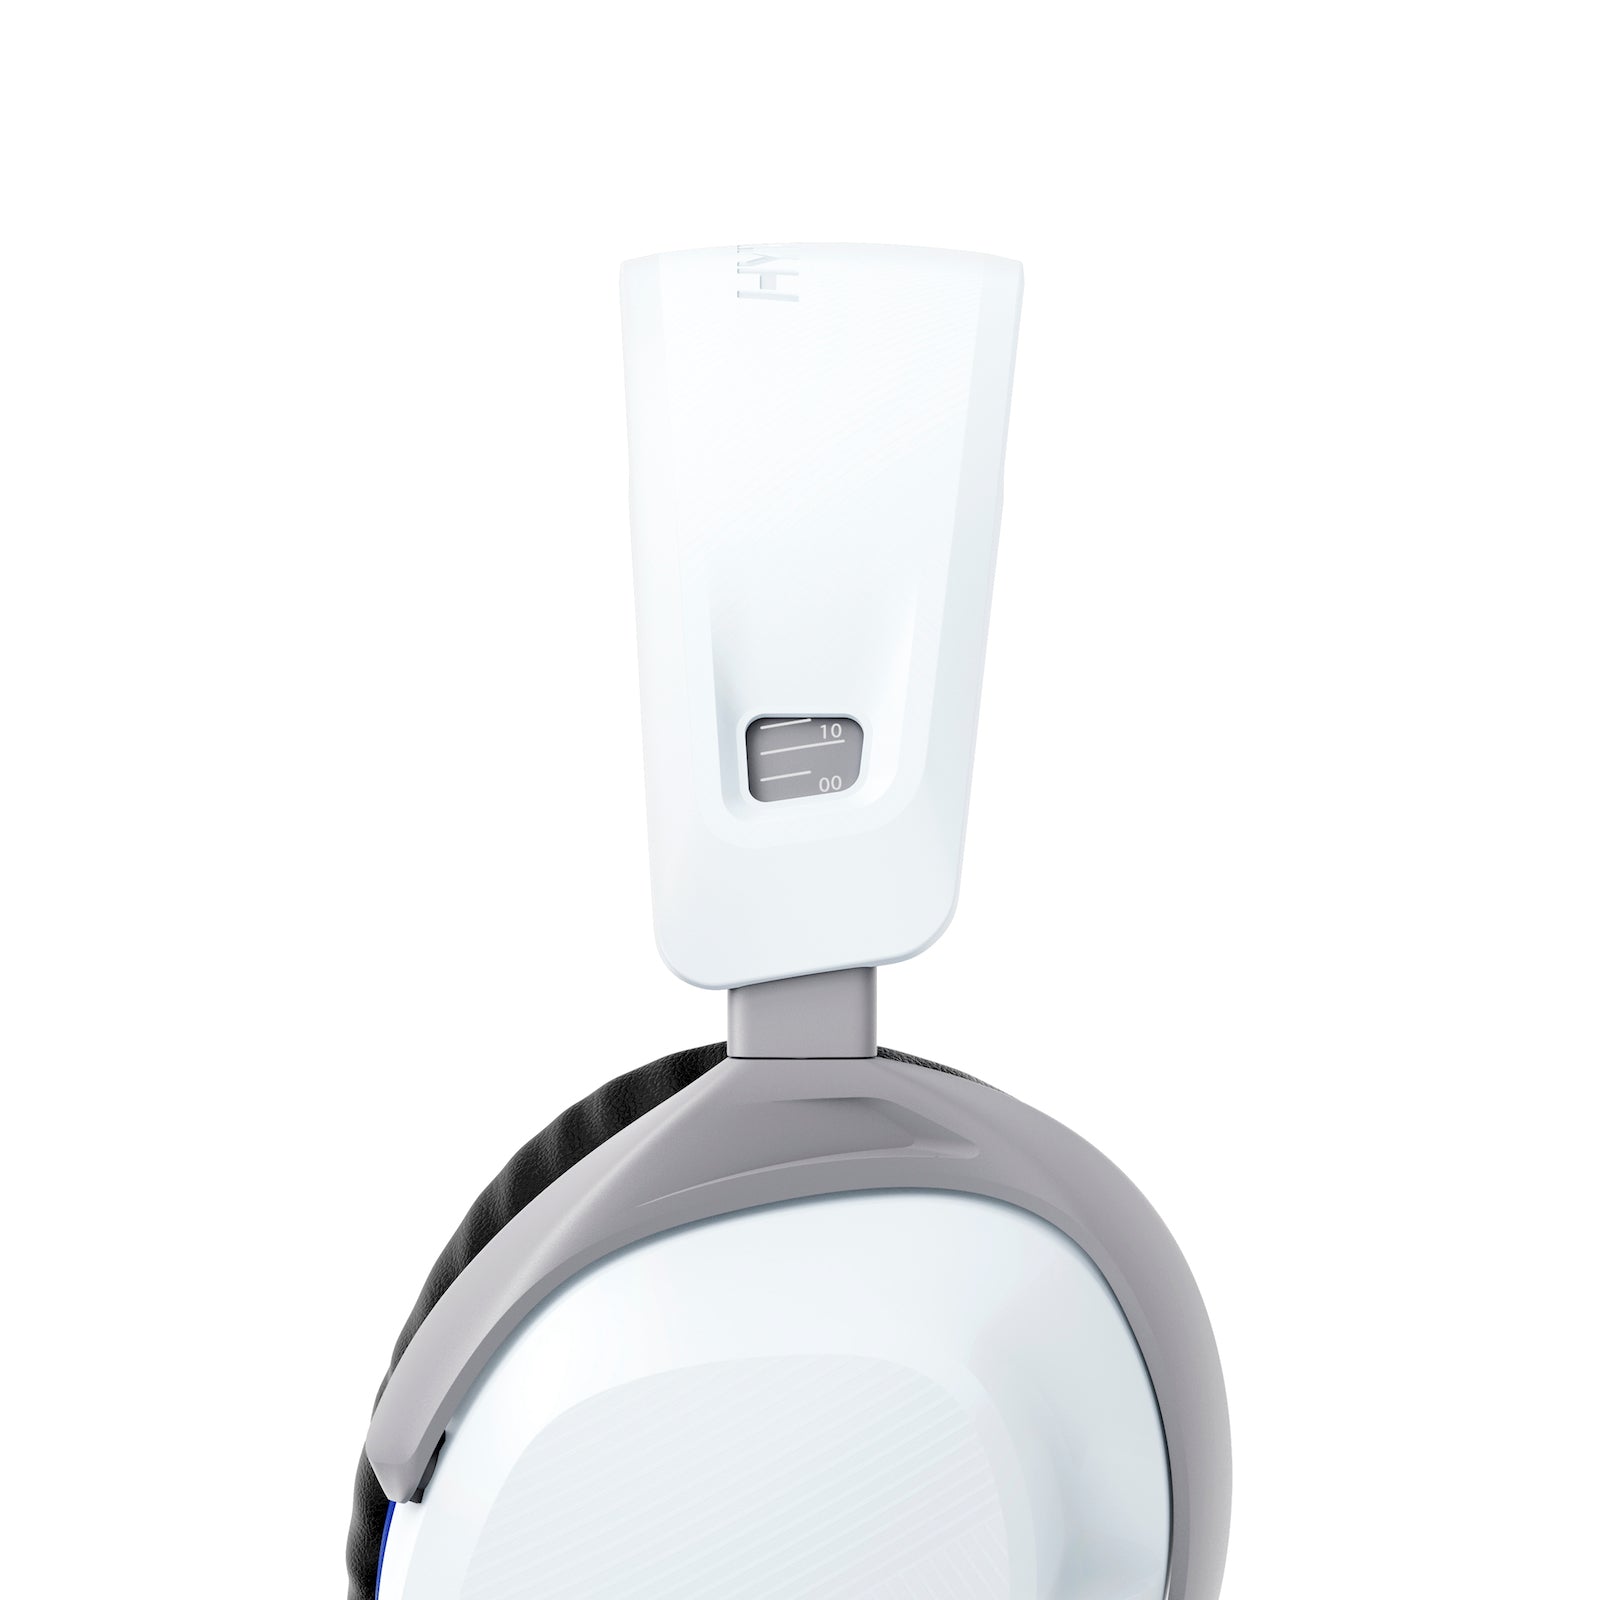 HyperX CloudX Stinger 2 White Gaming Headset for PlayStation - side view featuring the frame